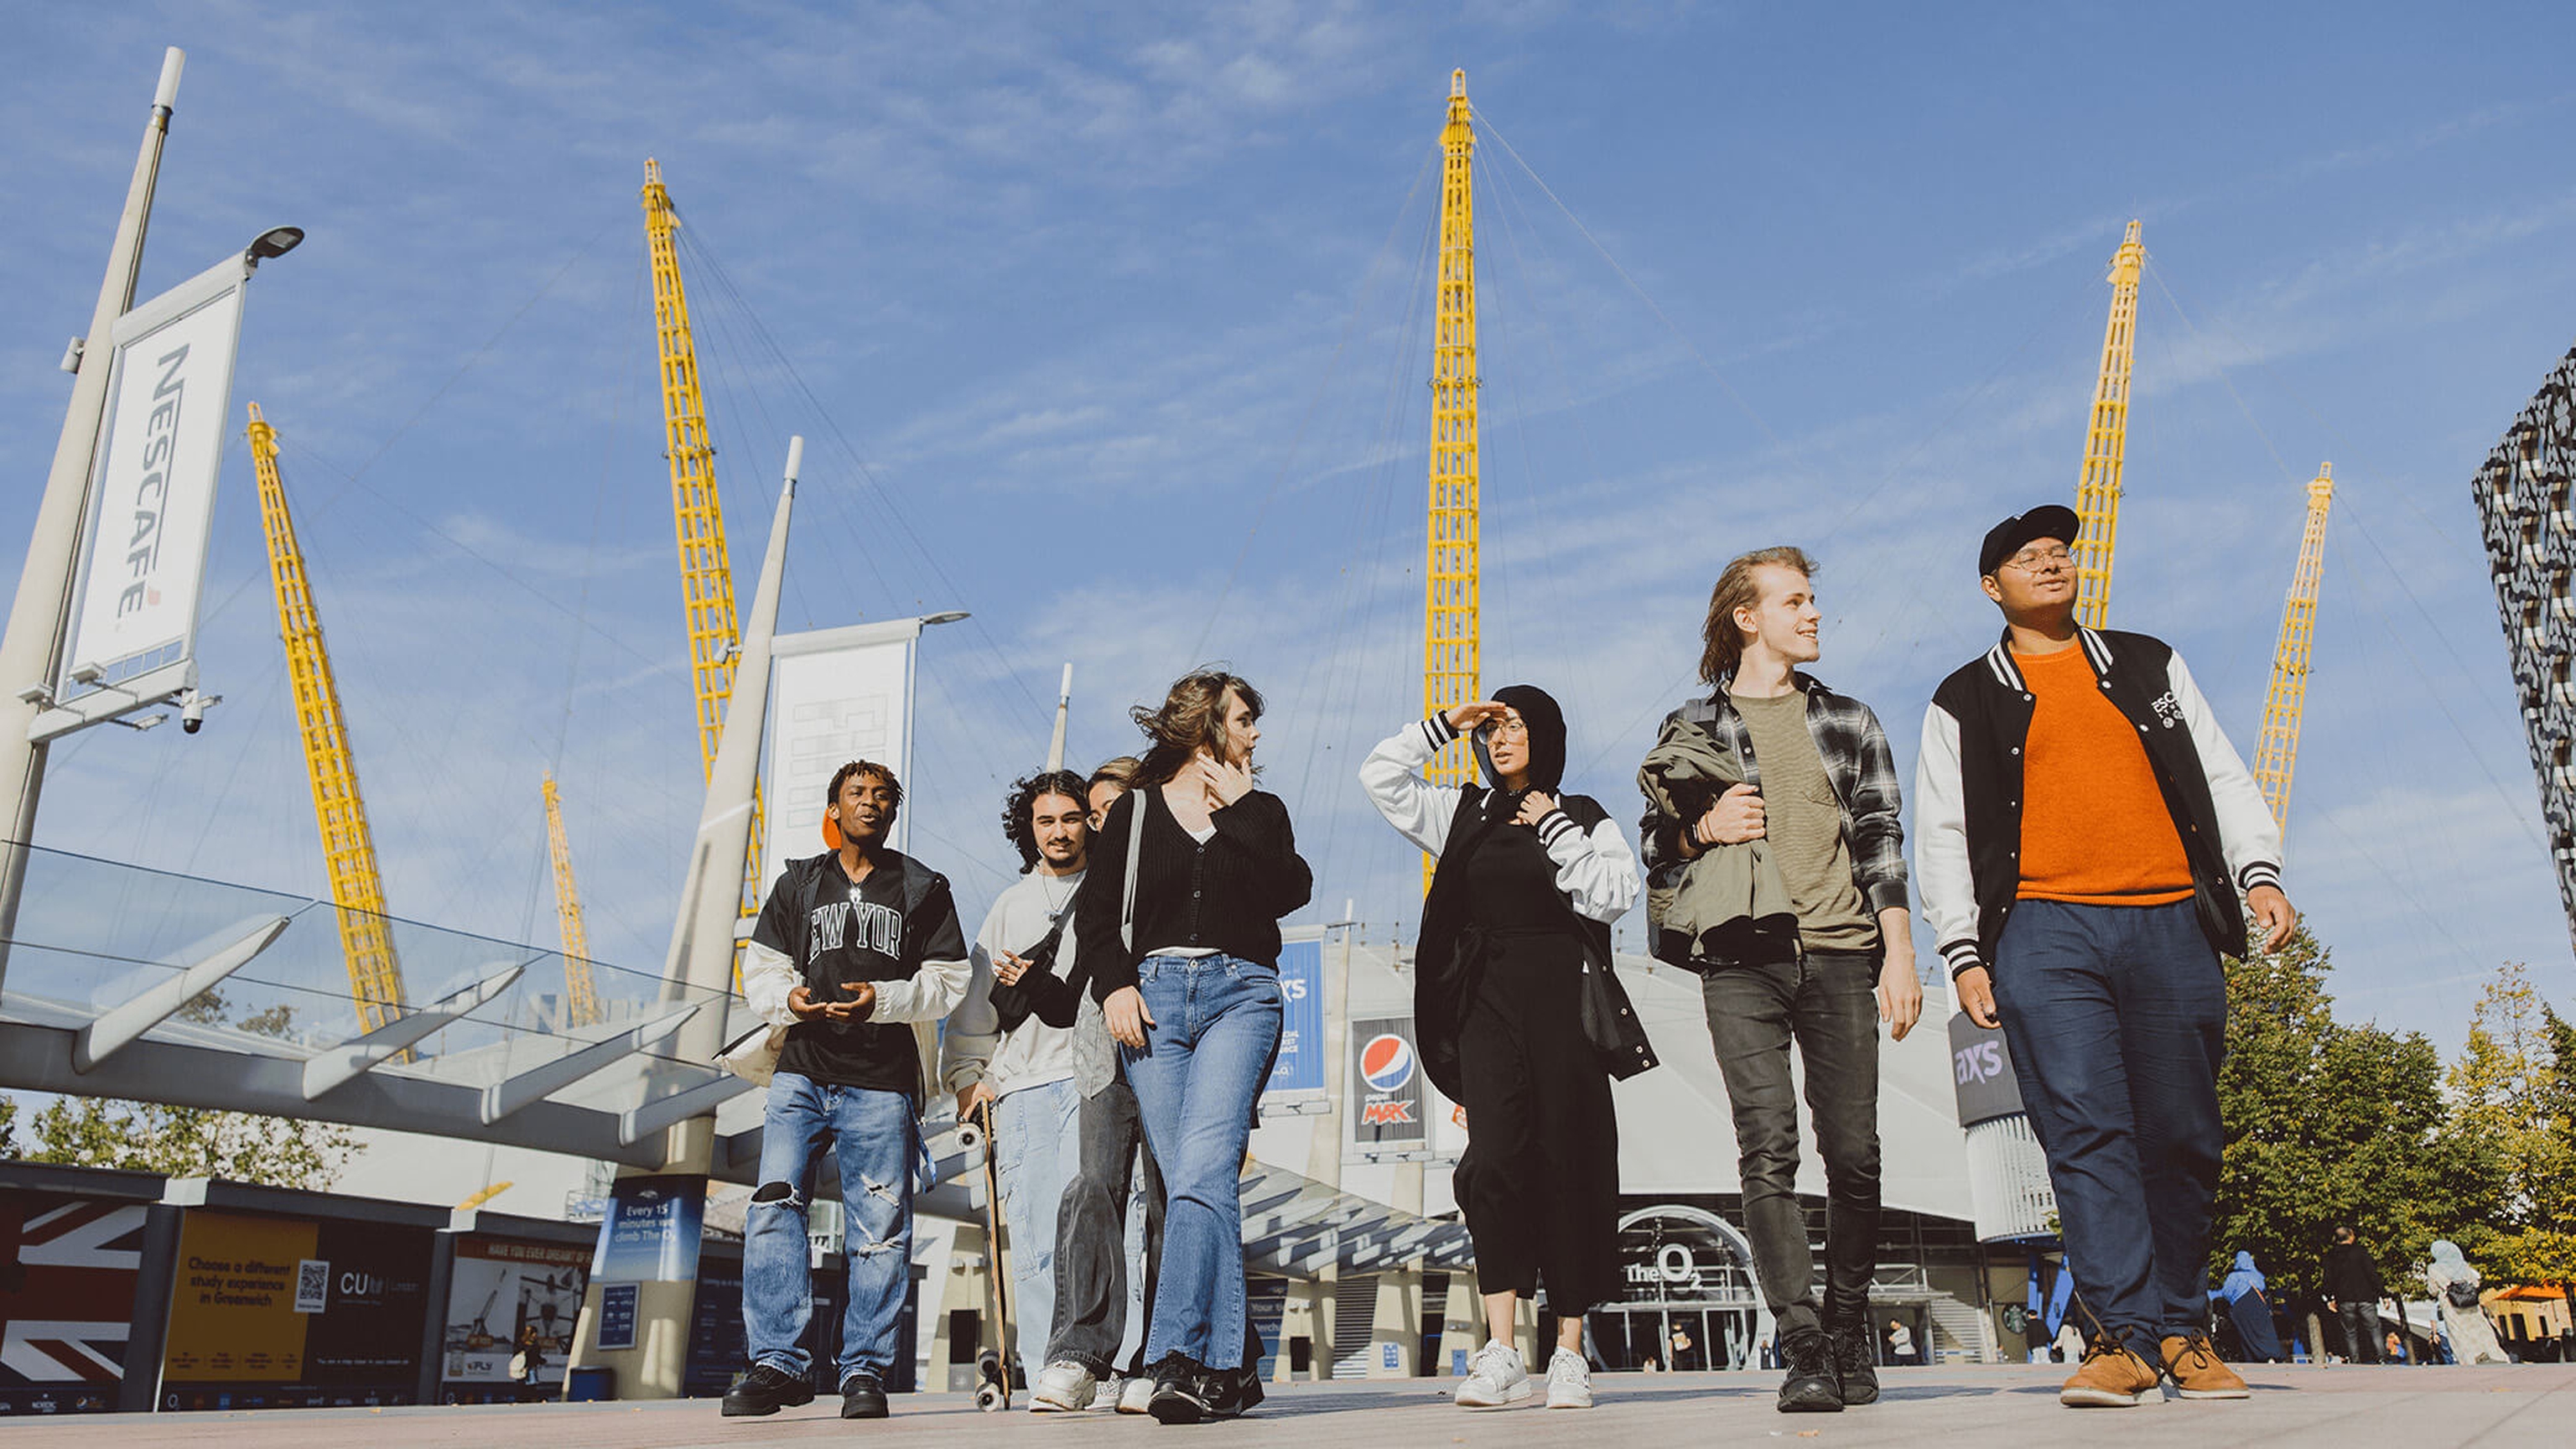 Group of students walking through North Greenwich with O2 arena in background